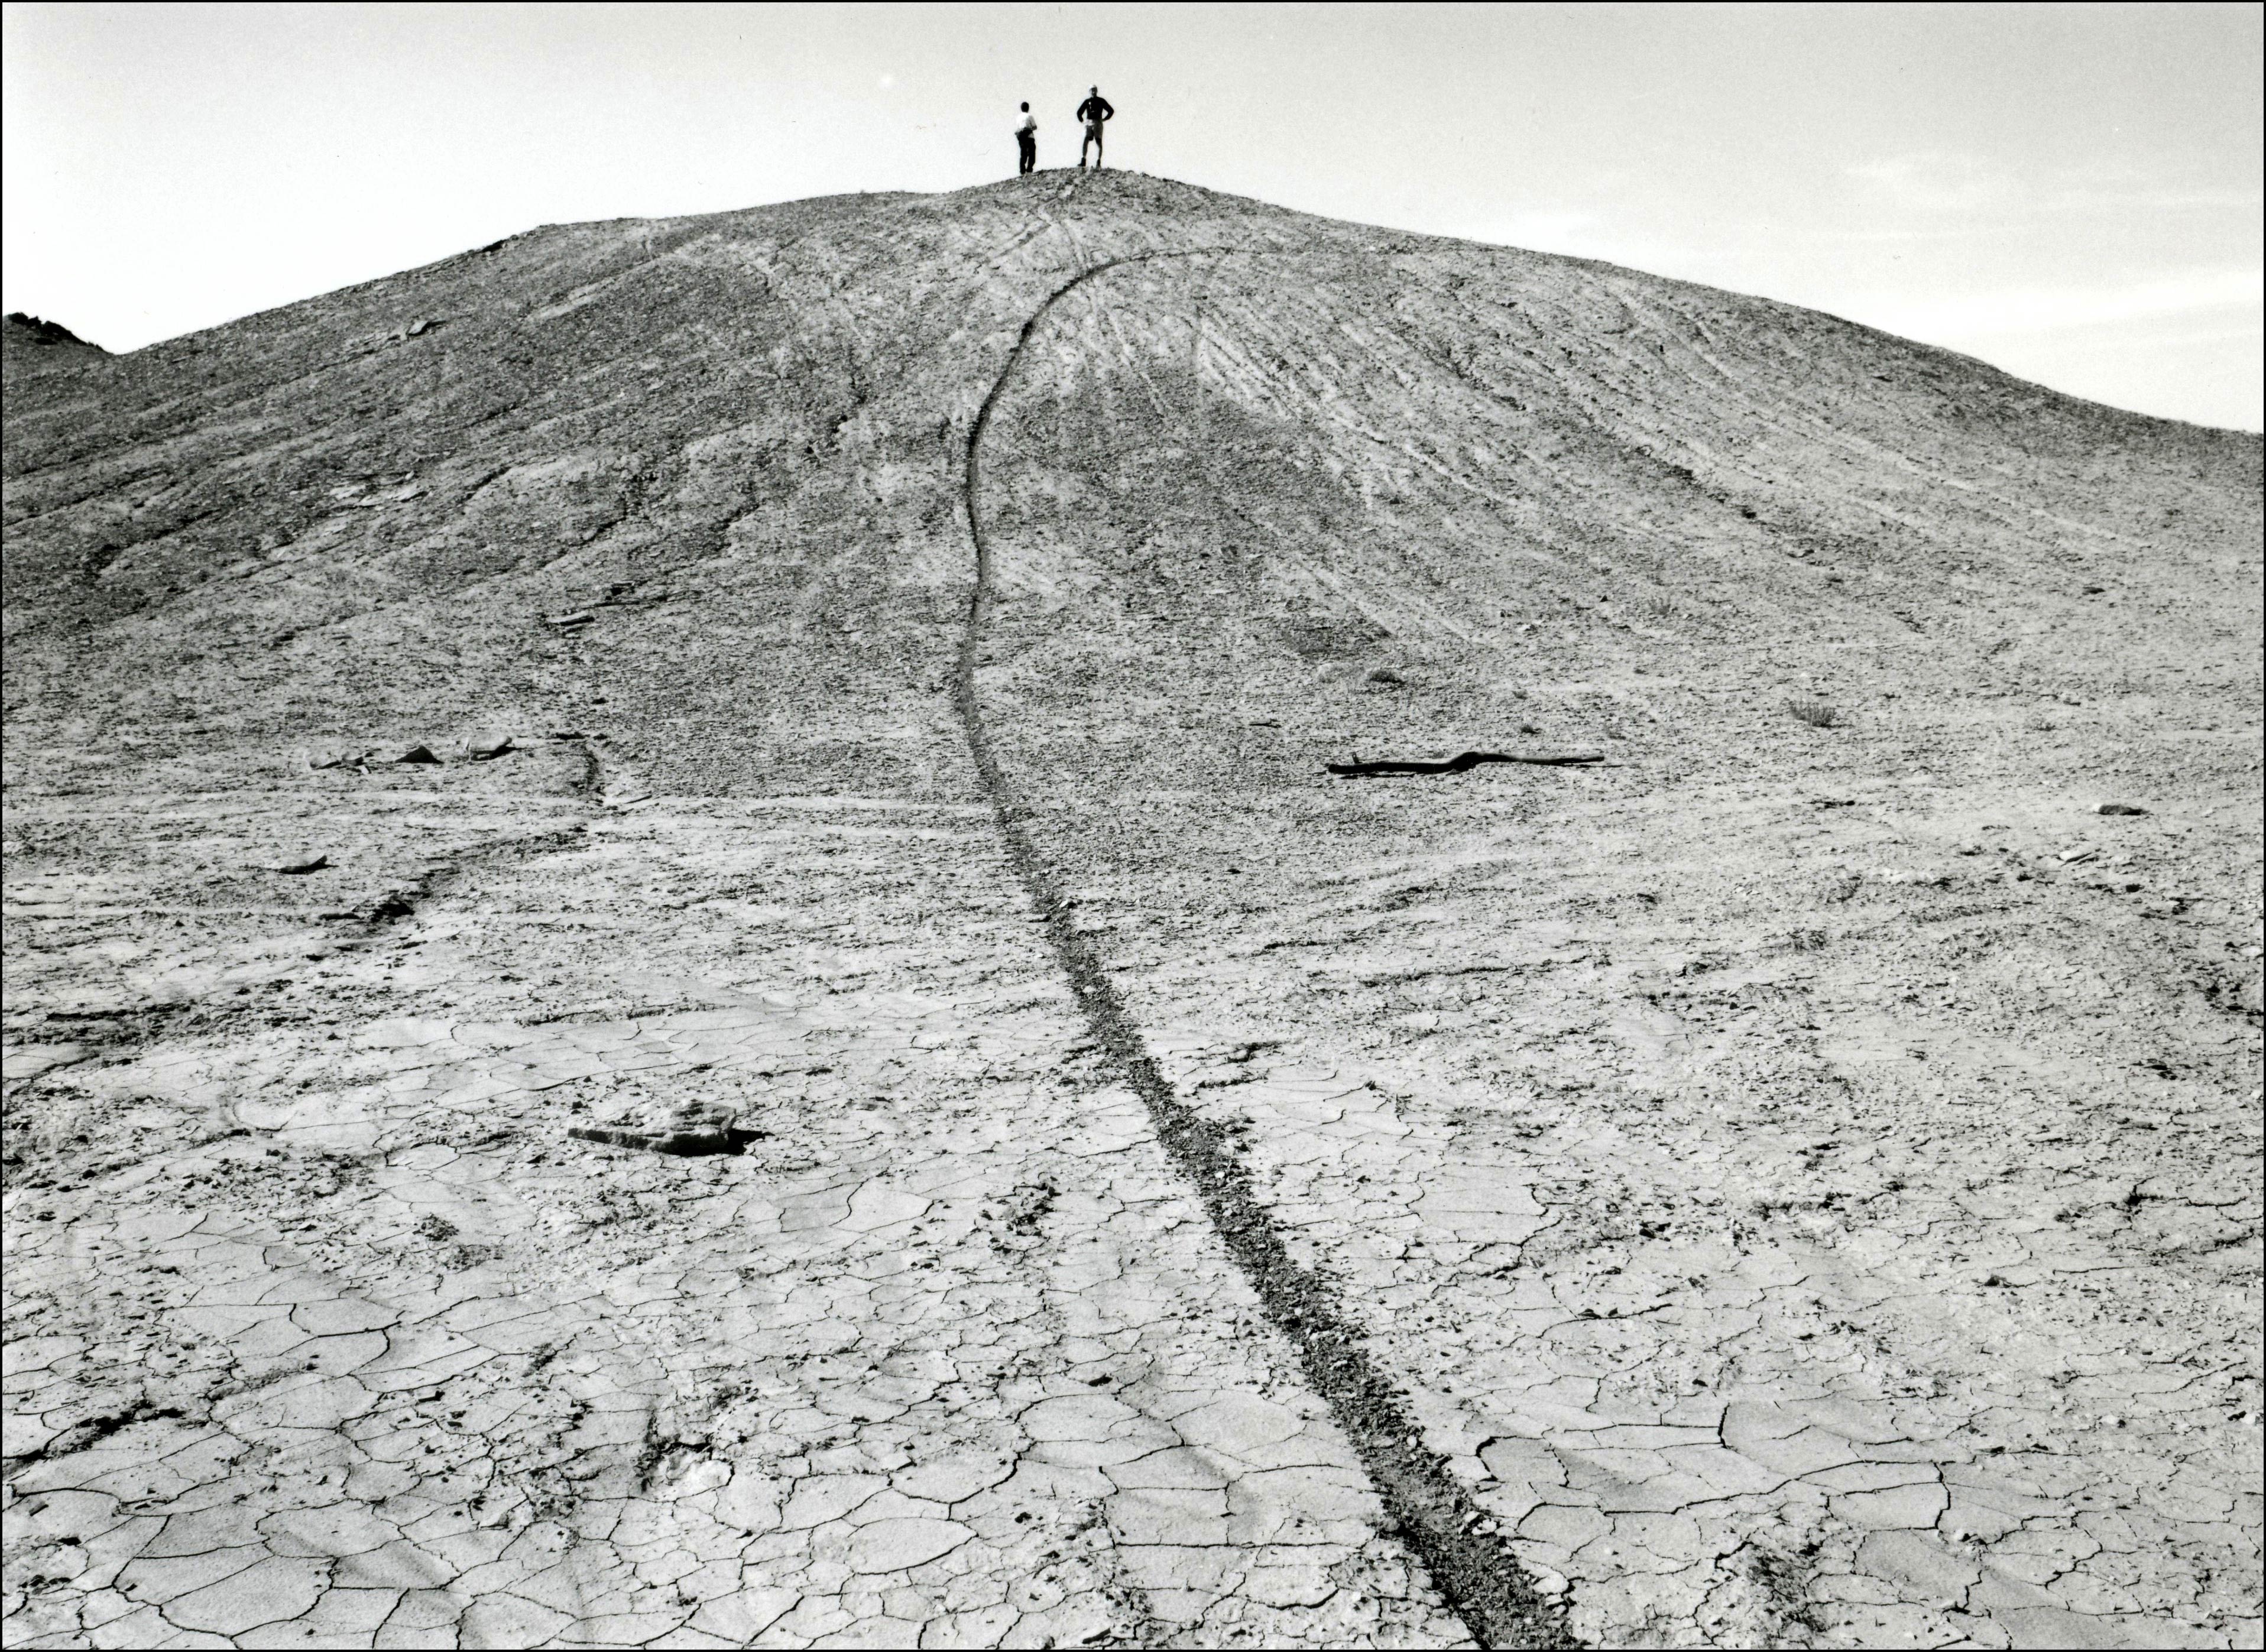 Two people standing on top of a hill in an area with cracked dirt and no vegetation. There is a single dirt bike track going up the hill.